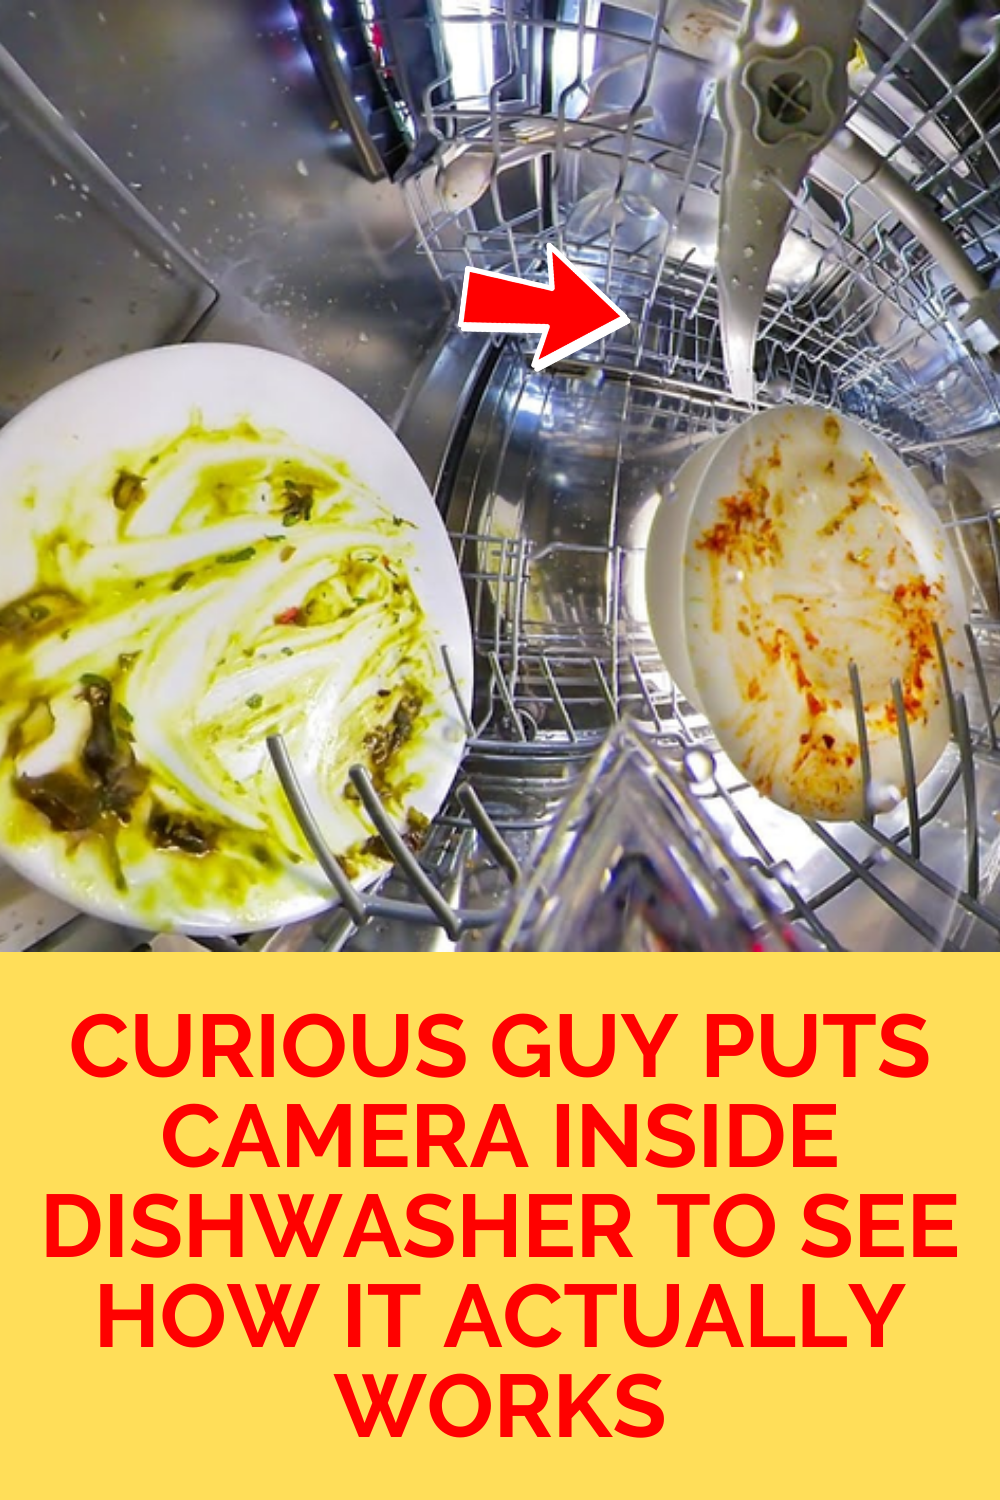 Curious guy puts camera inside dishwasher to see how it actually works